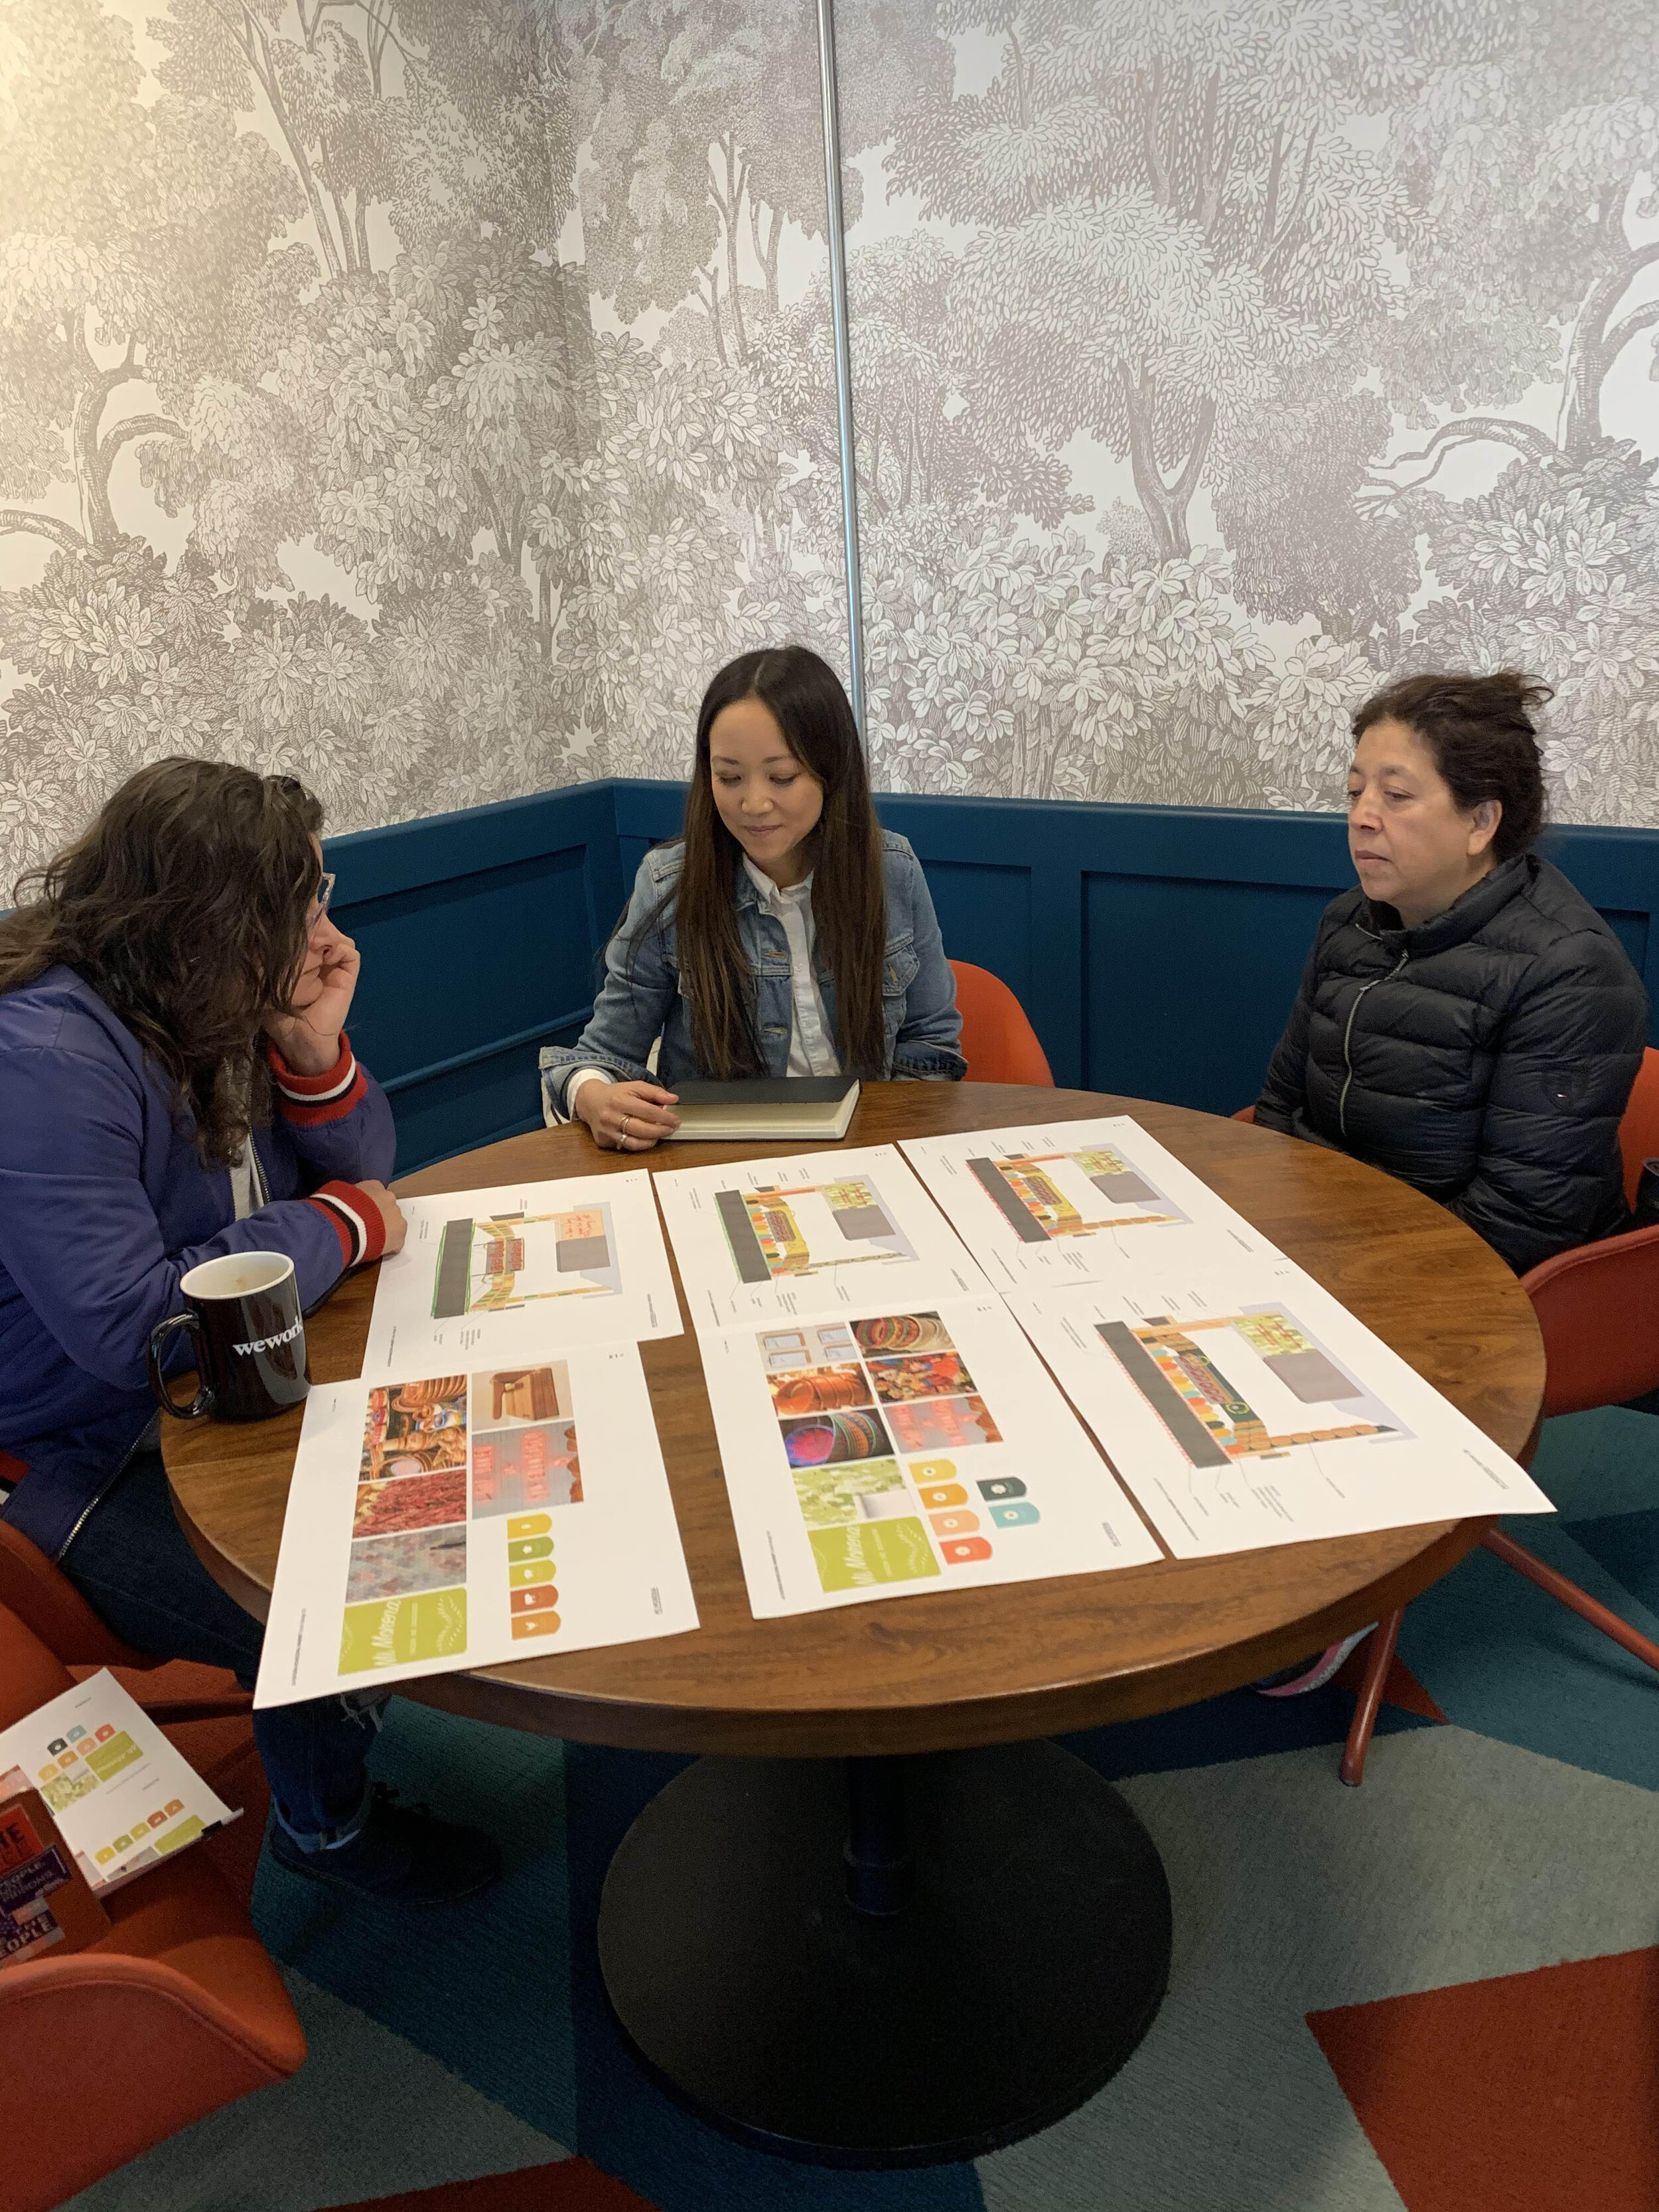 A planning meeting for the Municipal Marketplace with Emiliana Puyana from La Cocina &amp; Nickie Huang from Nicole Huang Designs